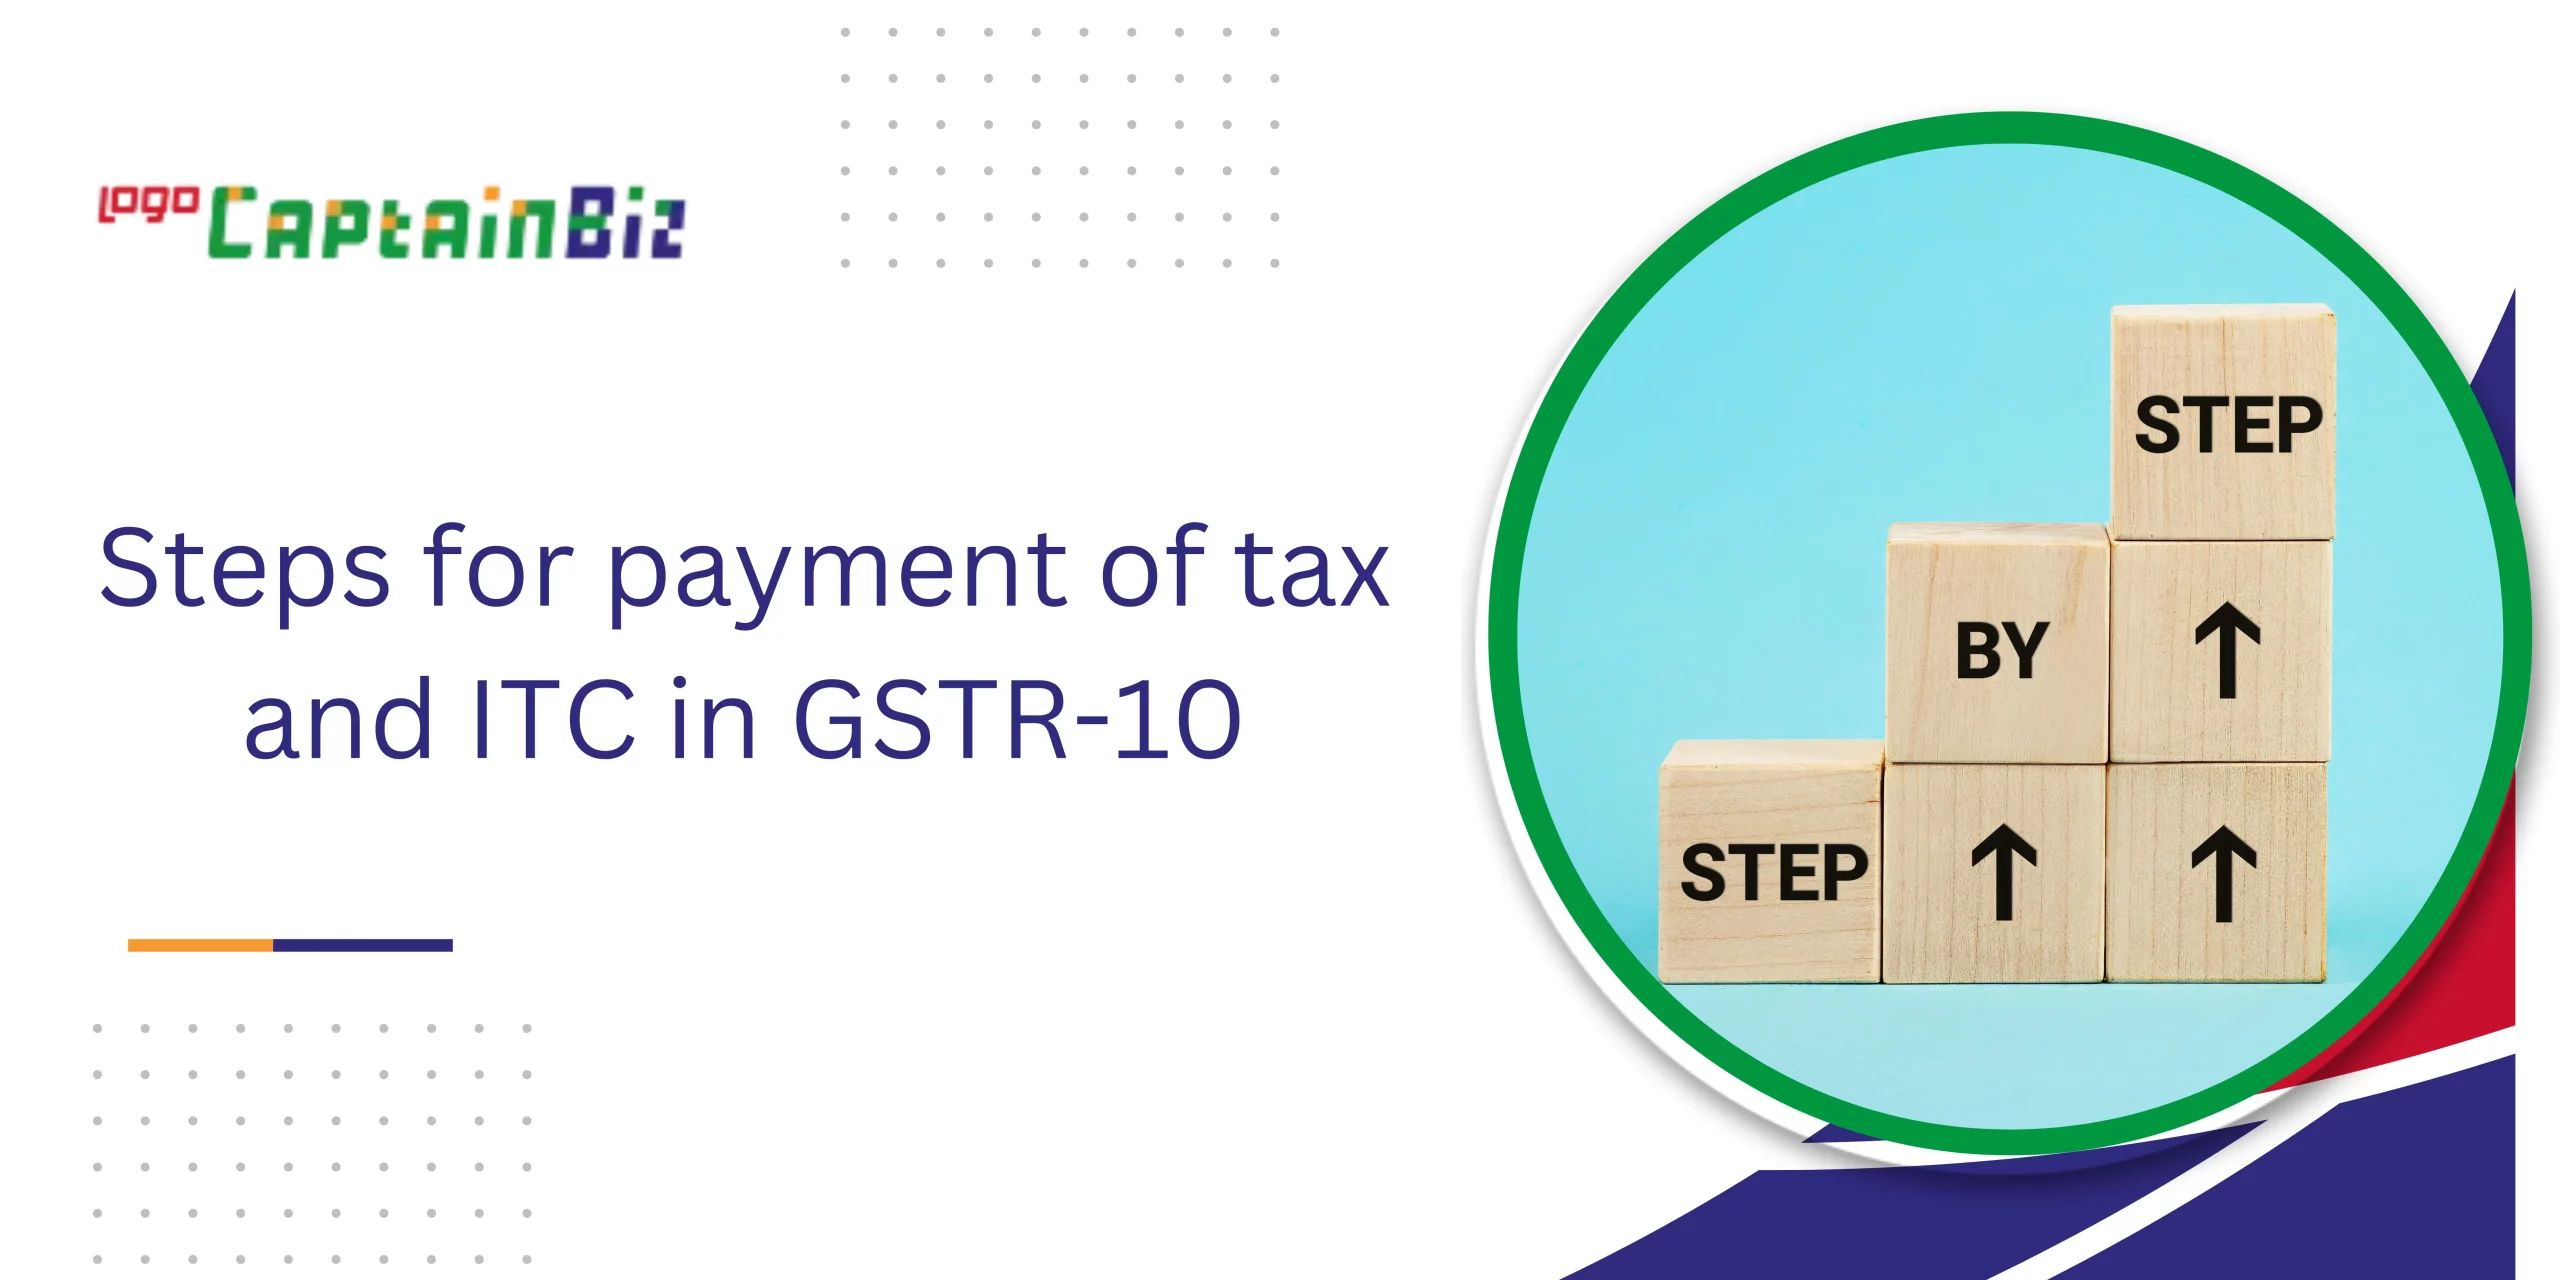 CaptainBiz: Steps for payment of tax and ITC in GSTR-10